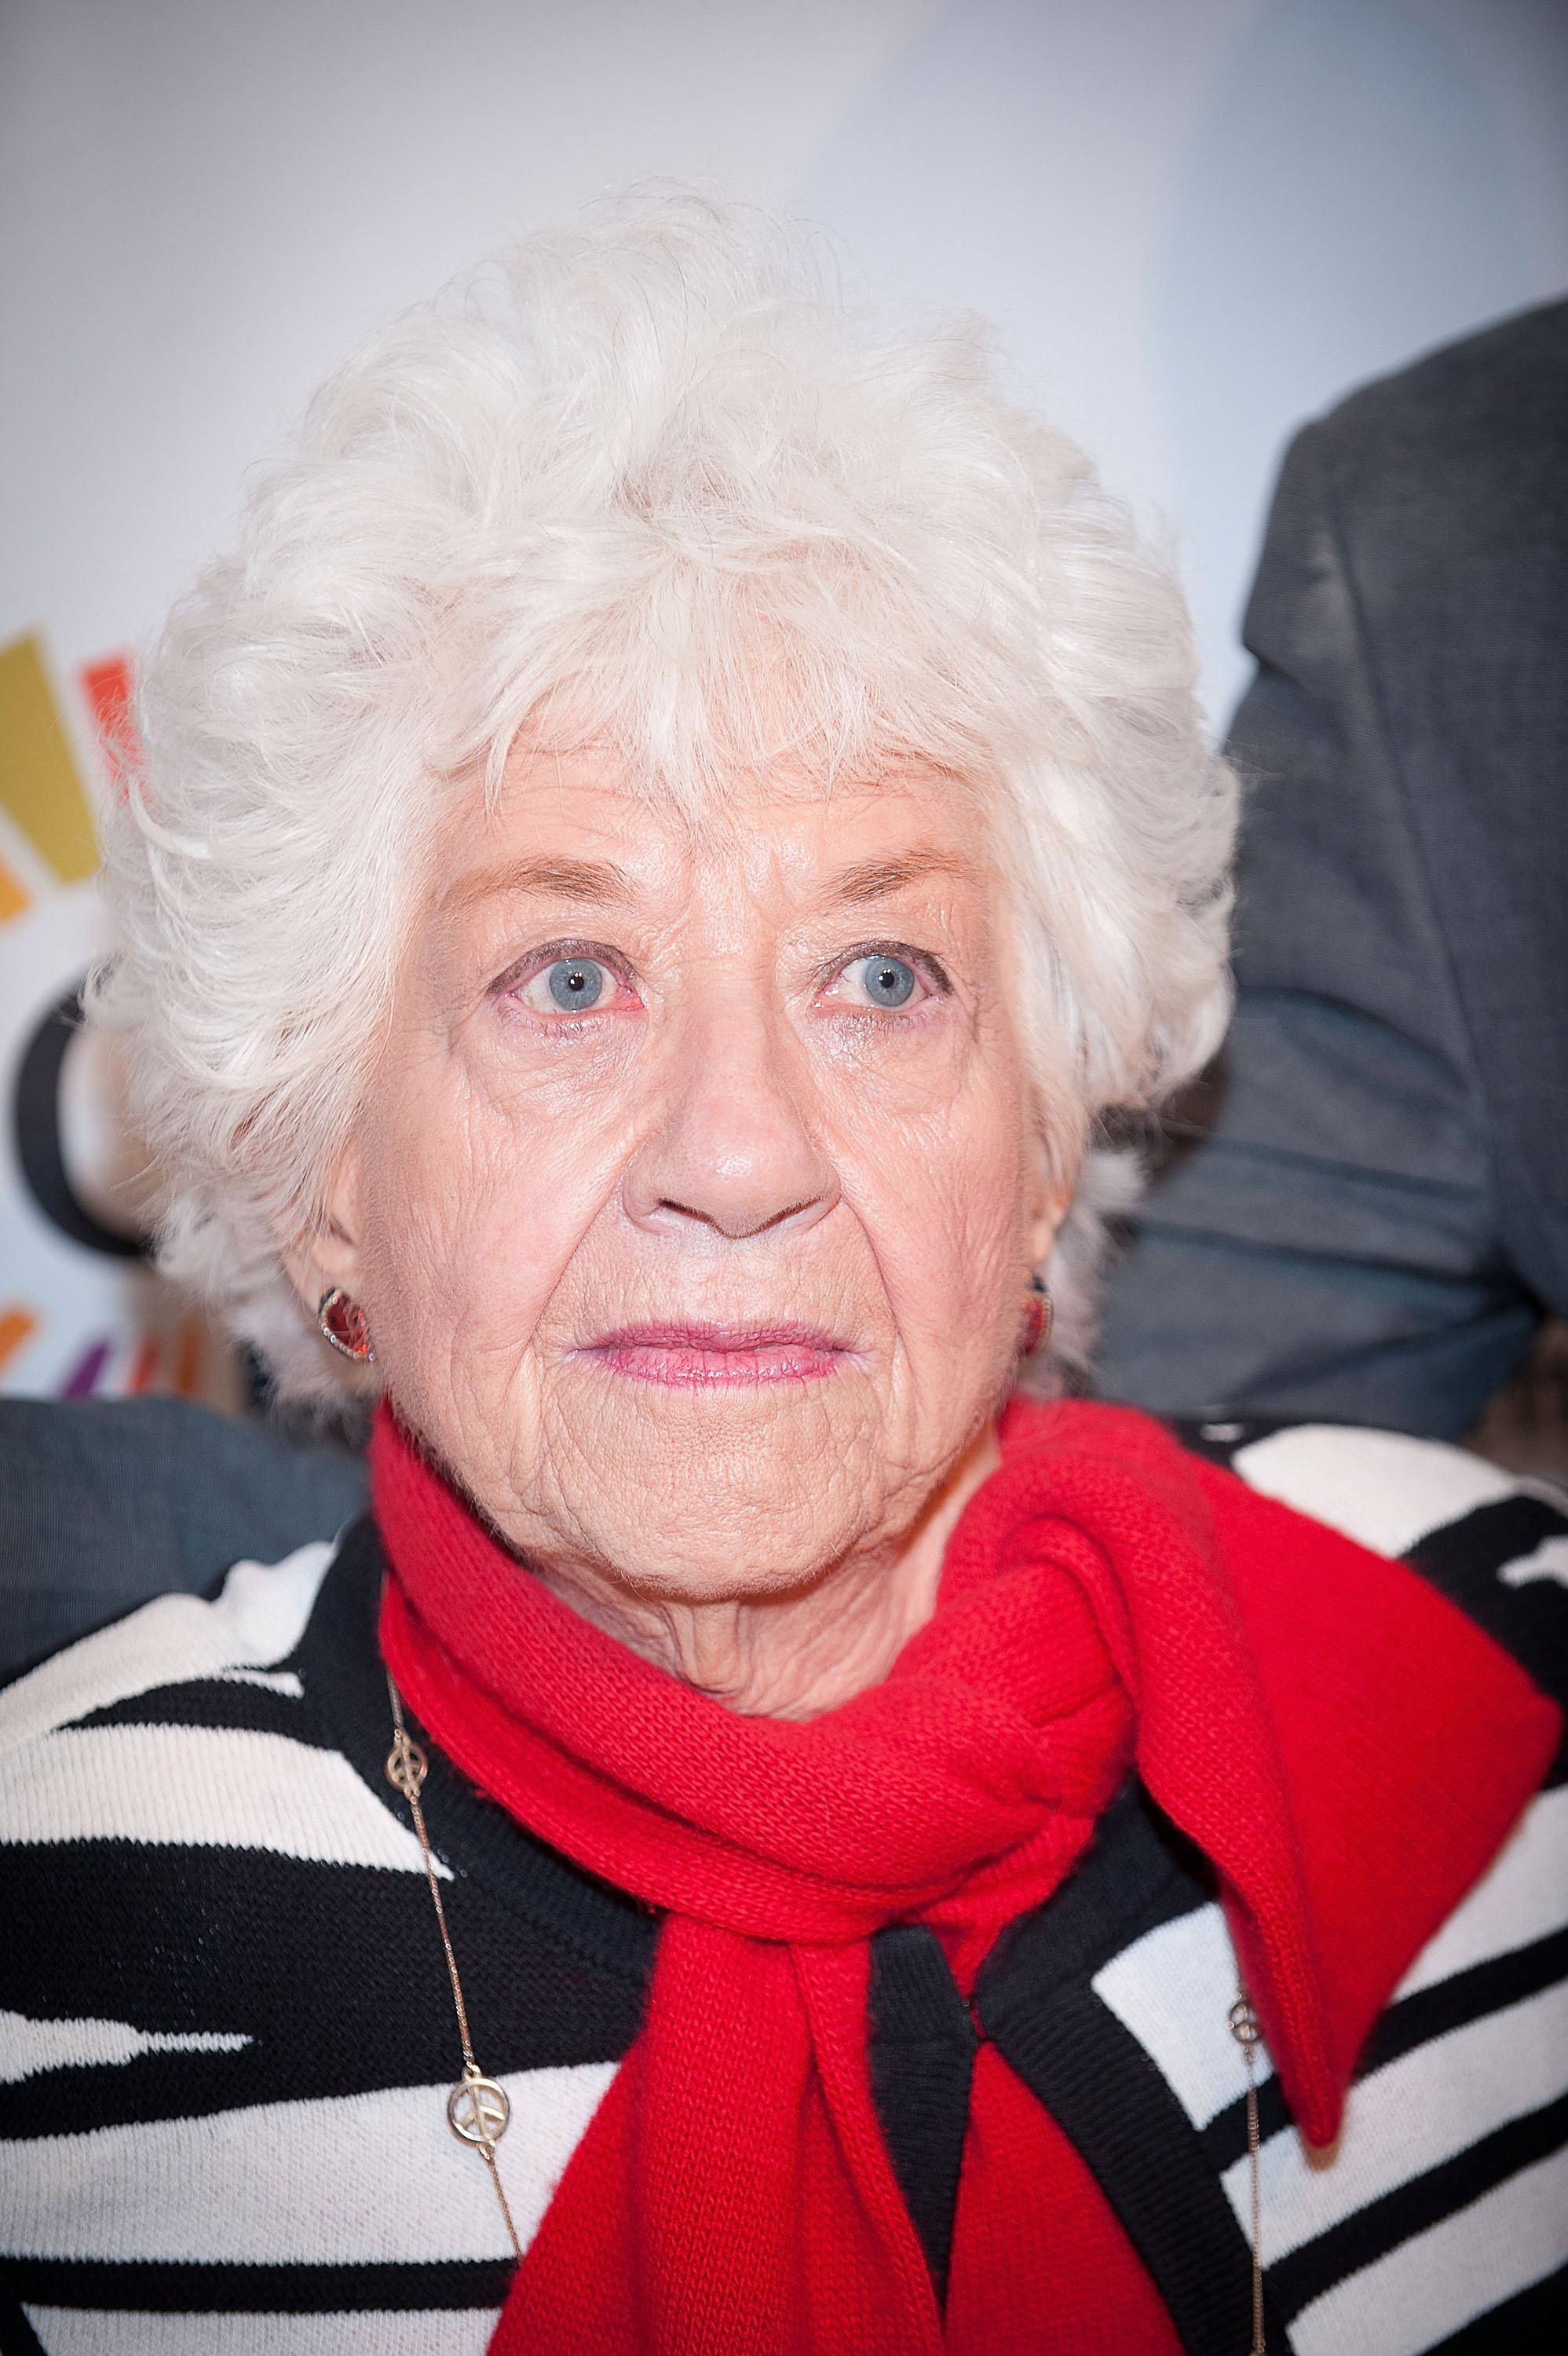 Actress Charlotte Rae attends The Center Dinner to benefit The Lesbian, Gay, Bisexual & Transgender Community Center held at the Metropolitan Pavilion on March 21, 2011. | Source: Getty Images